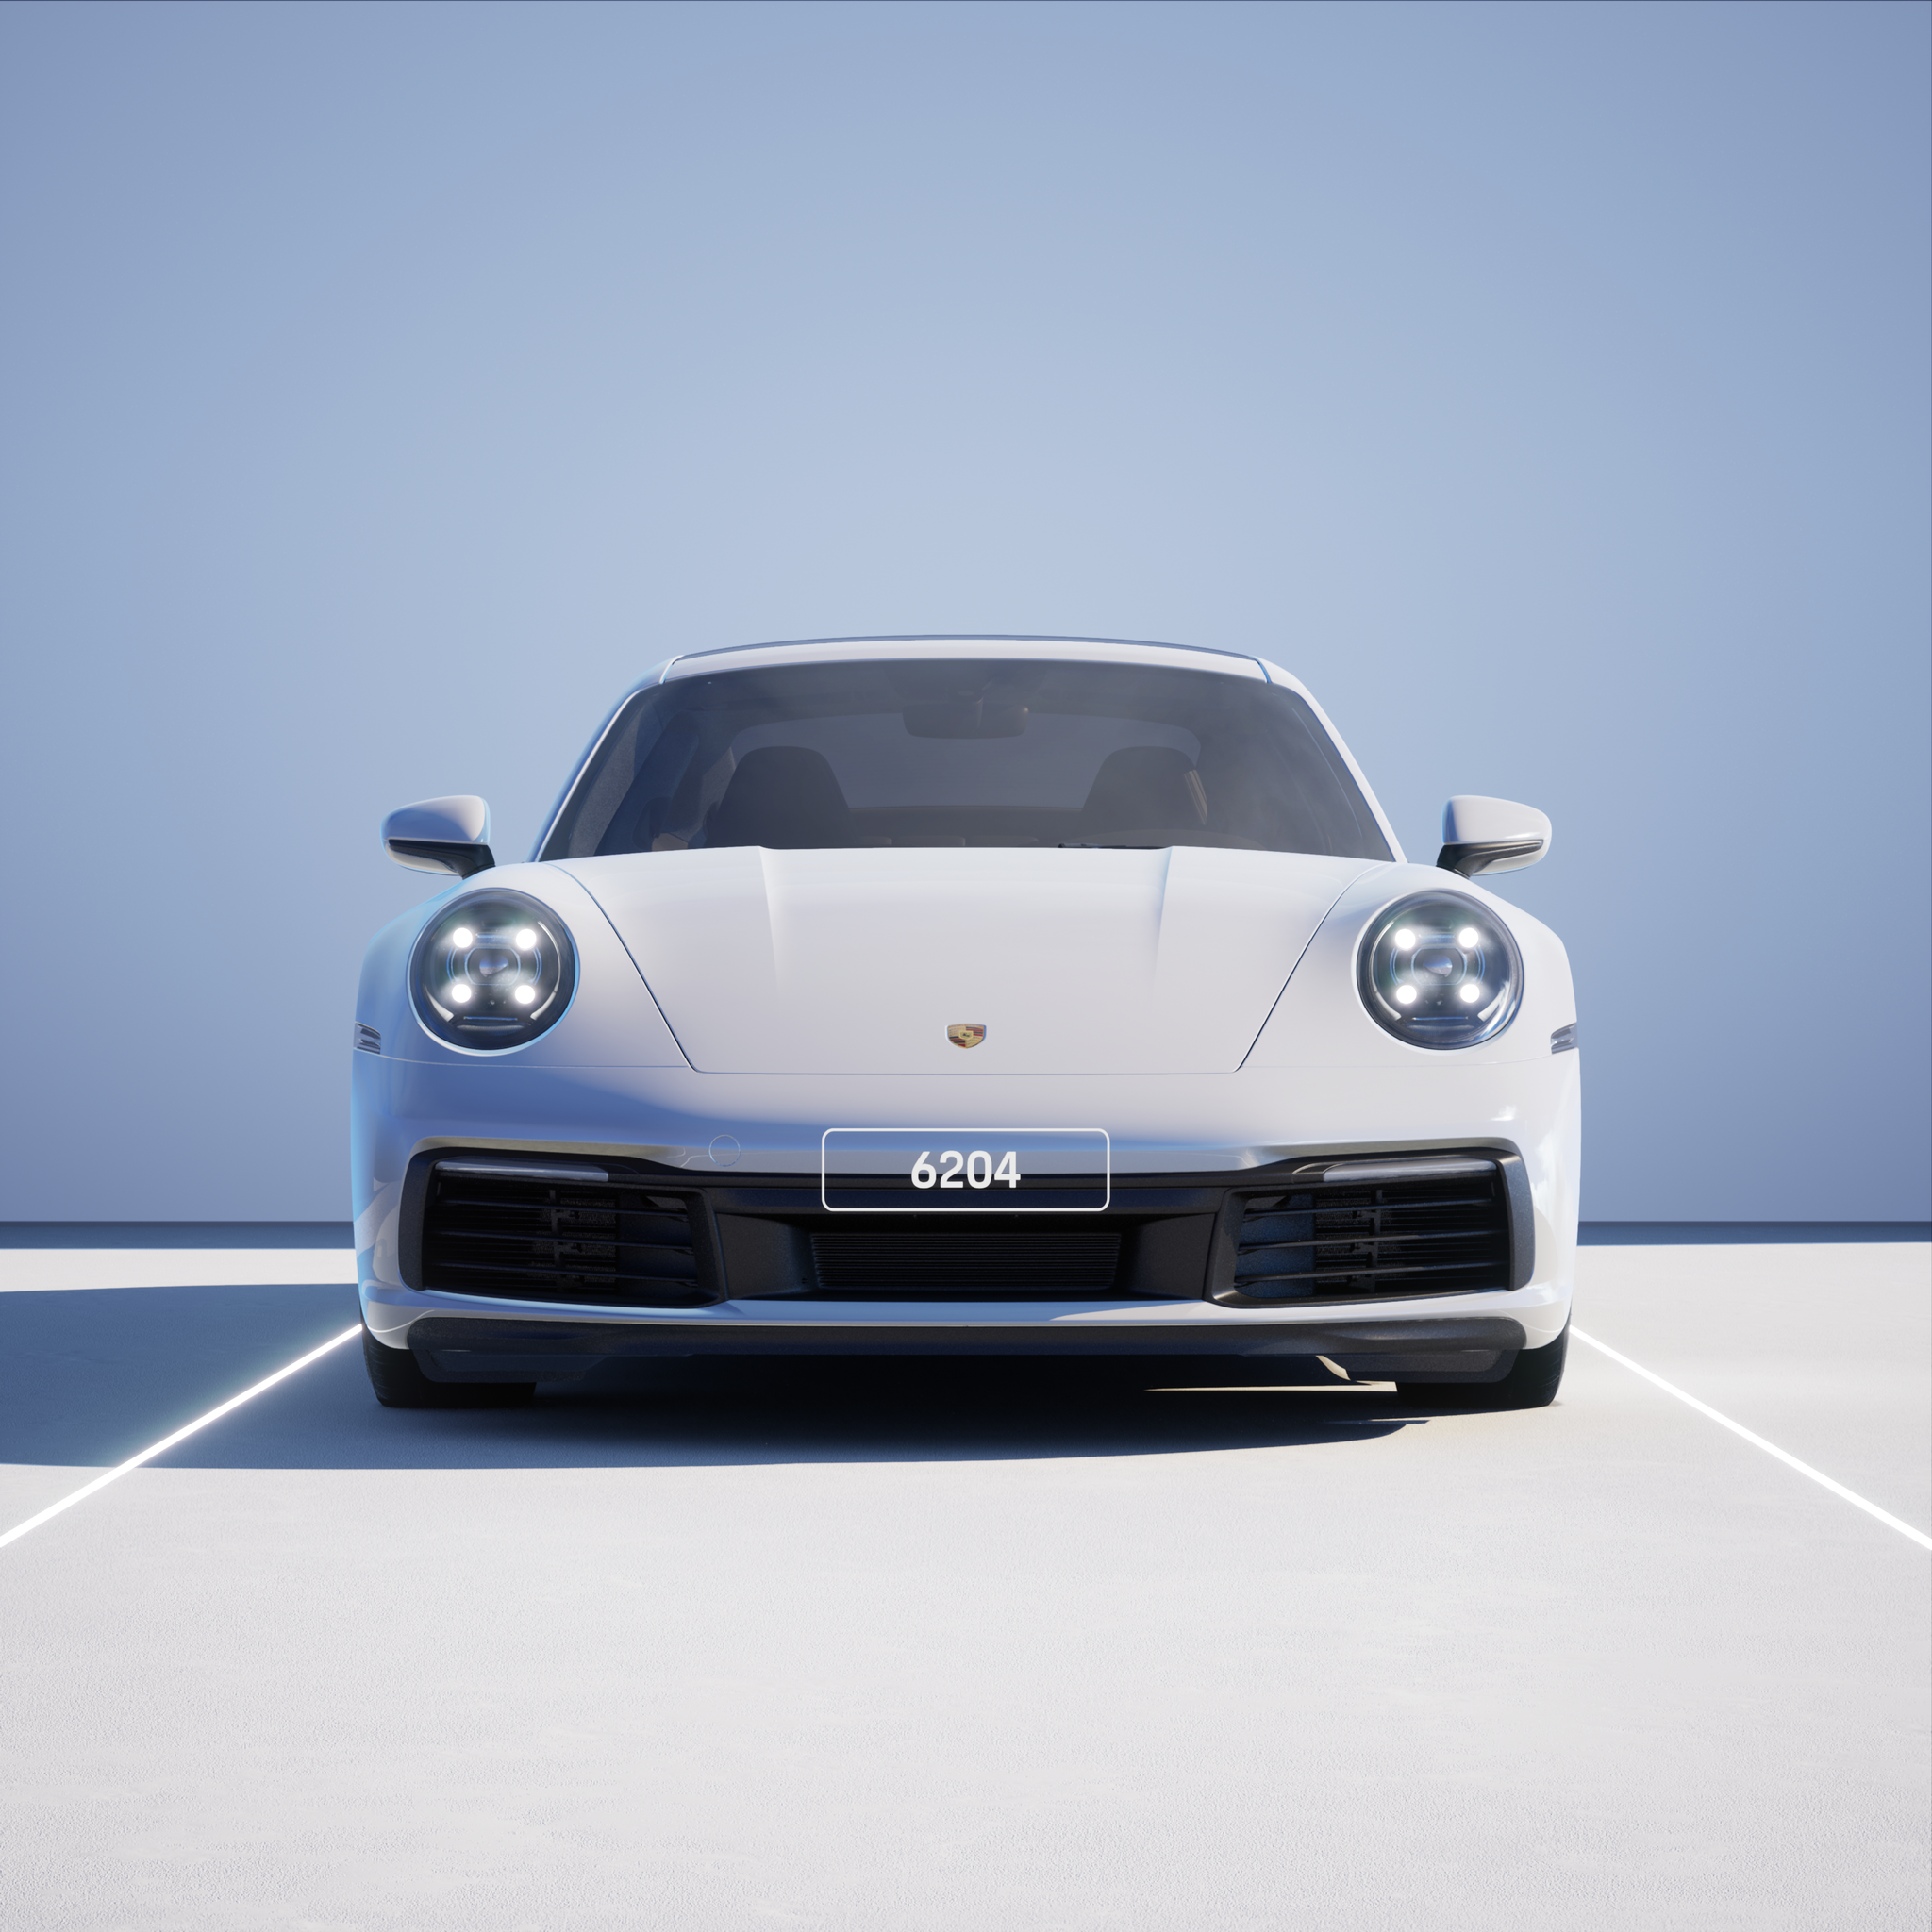 The PORSCHΞ 911 6204 image in phase